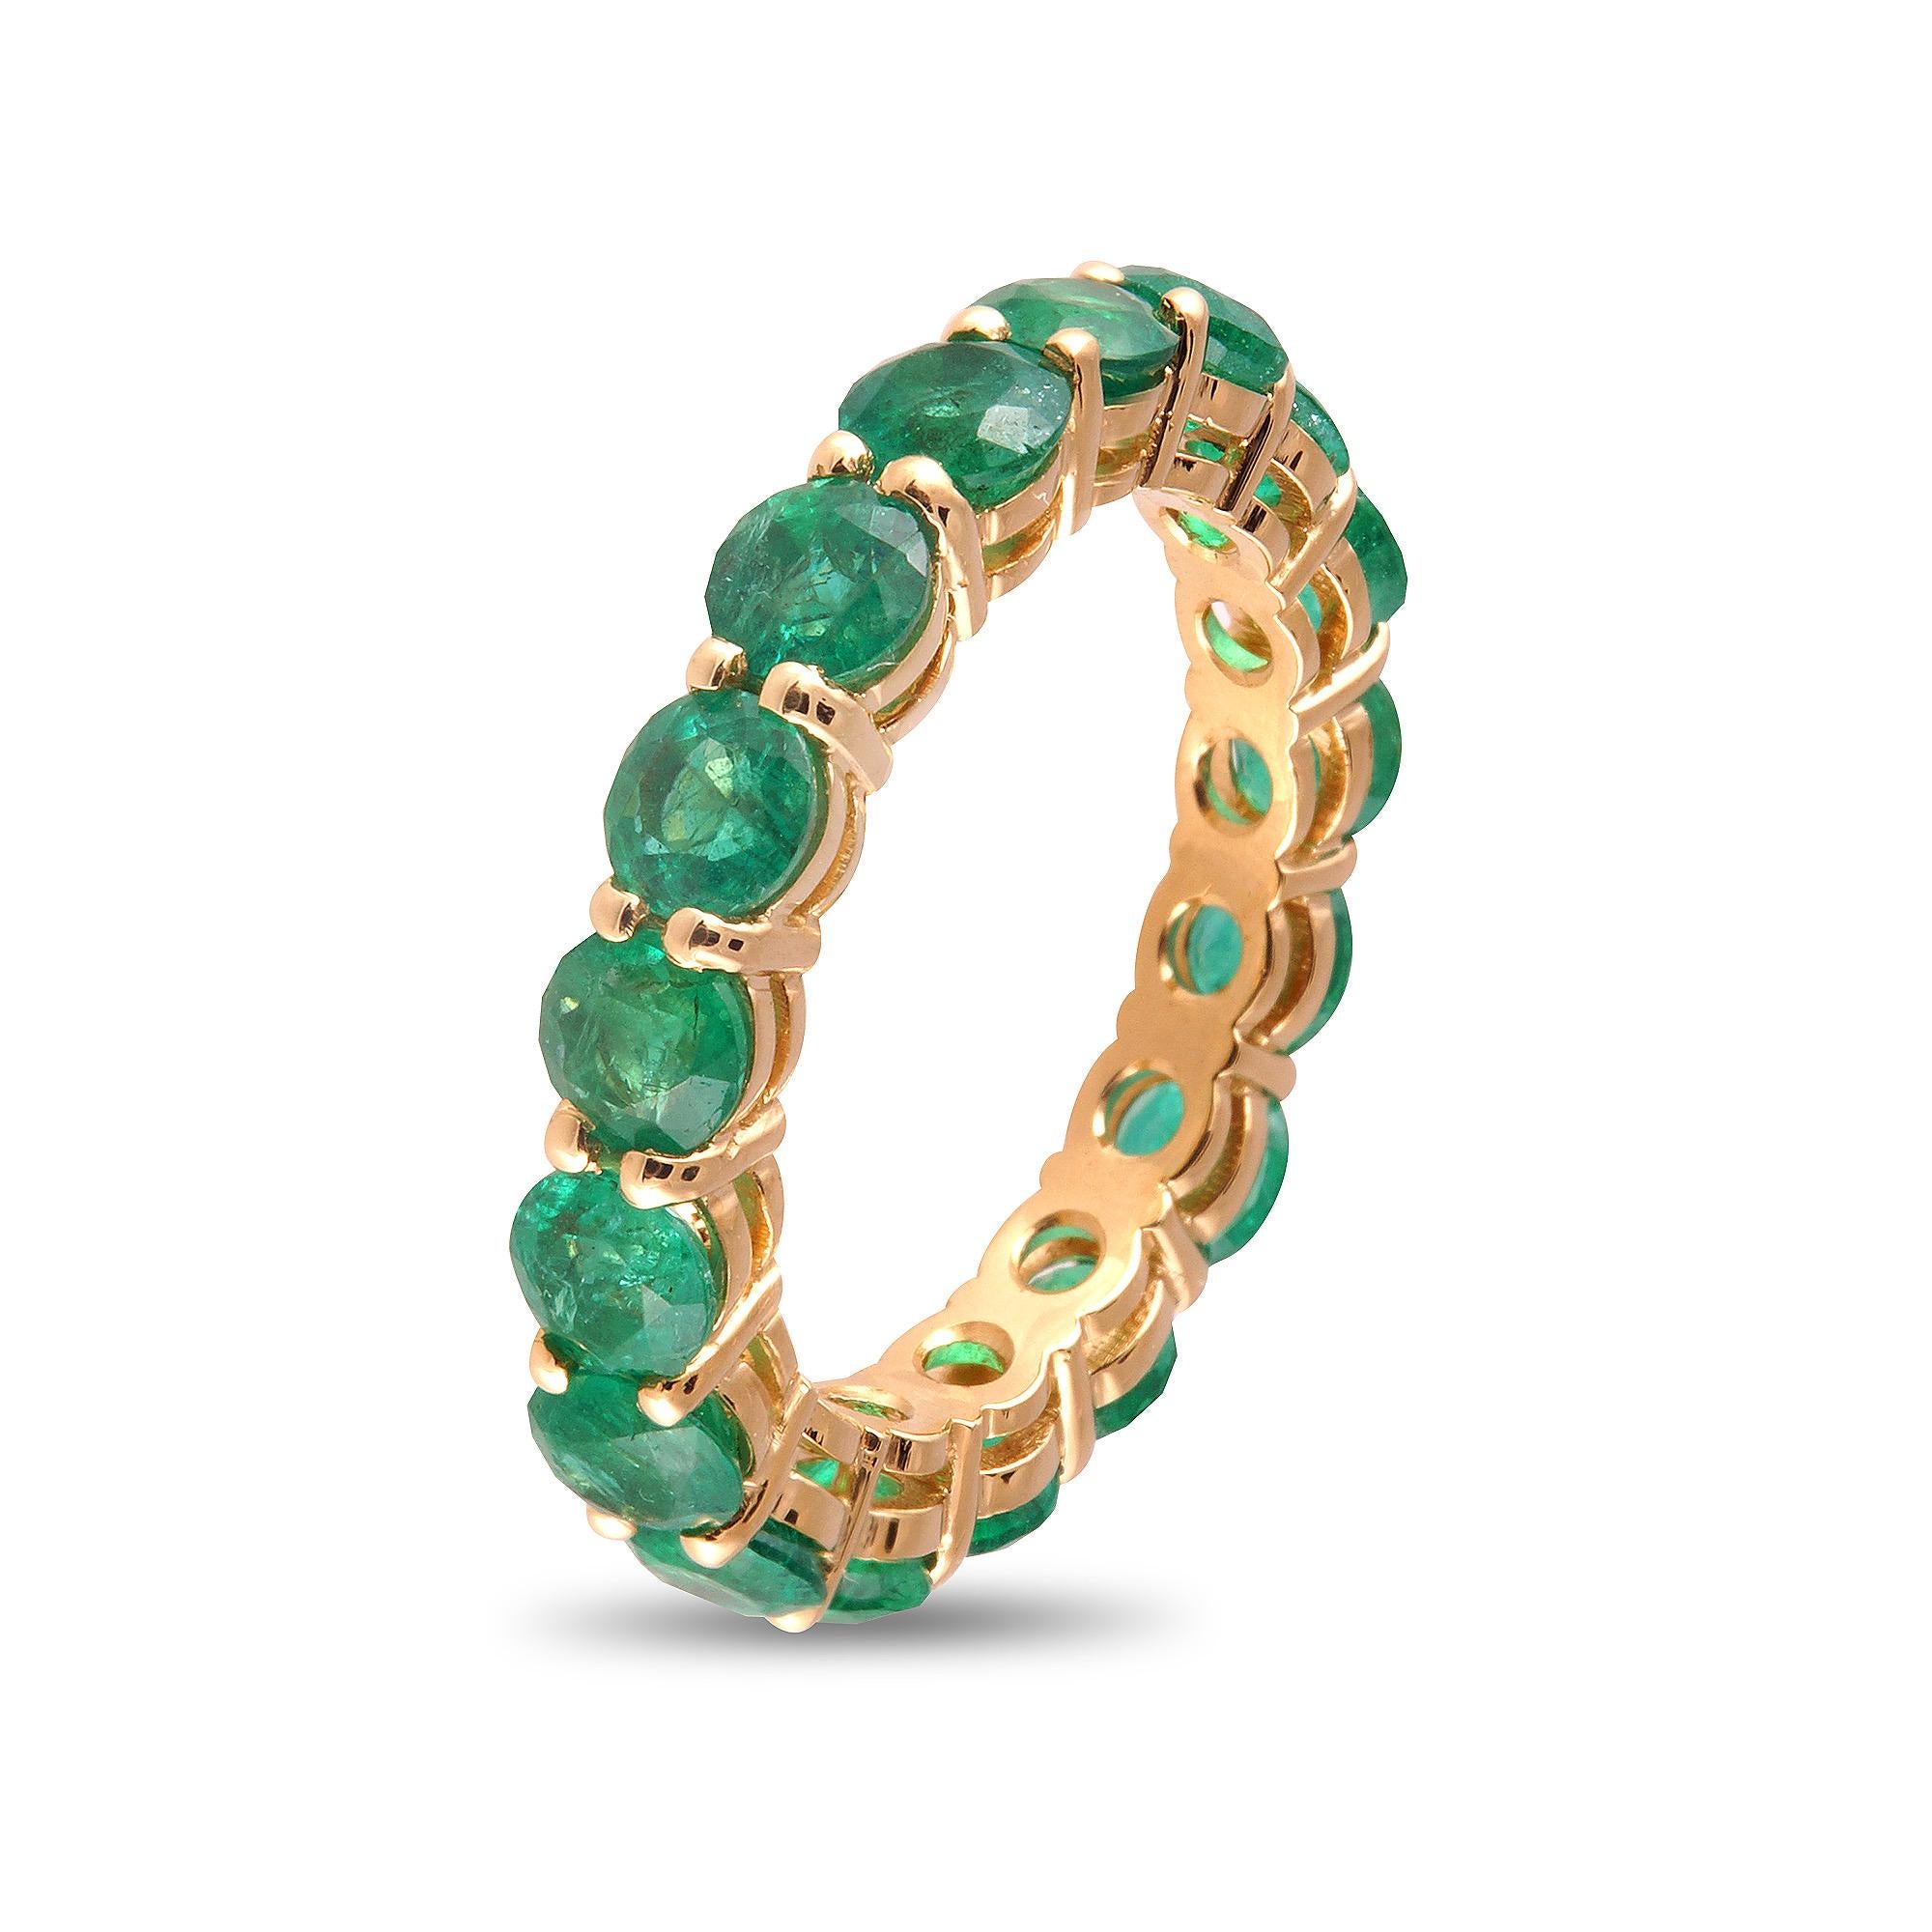 Ravishing 4.31 carat Emerald eternity band with shared prongs. Perfect to compliment any ring stack and give it a pop of color. Ideal gift to give to your significant other as a push present or as an anniversary band, since the unbroken circle